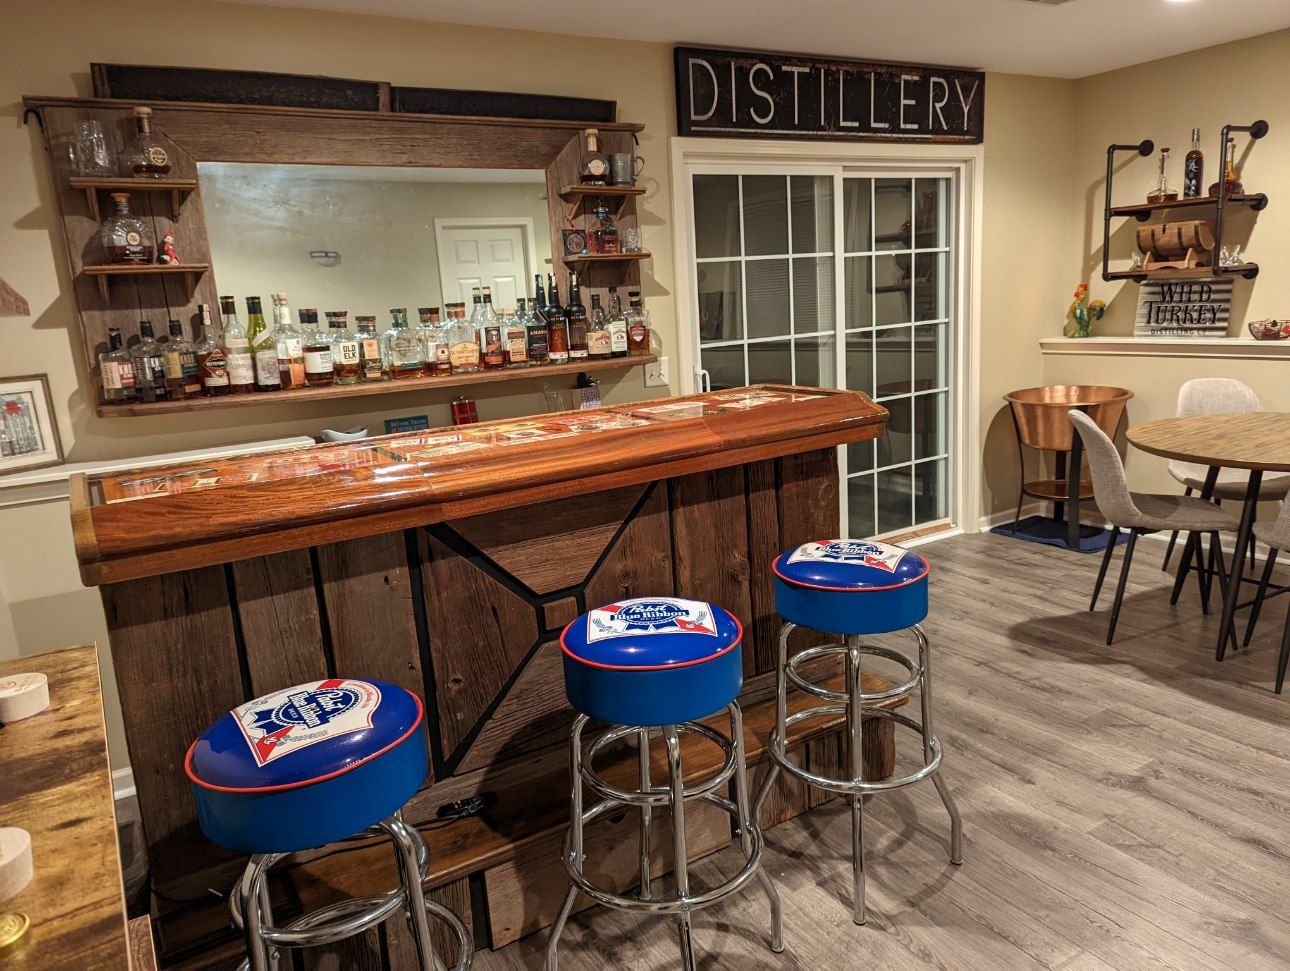 Basement Bar Decor Black Distillery Sign on canvas with words Distillery (Whiskey) in white lettering.